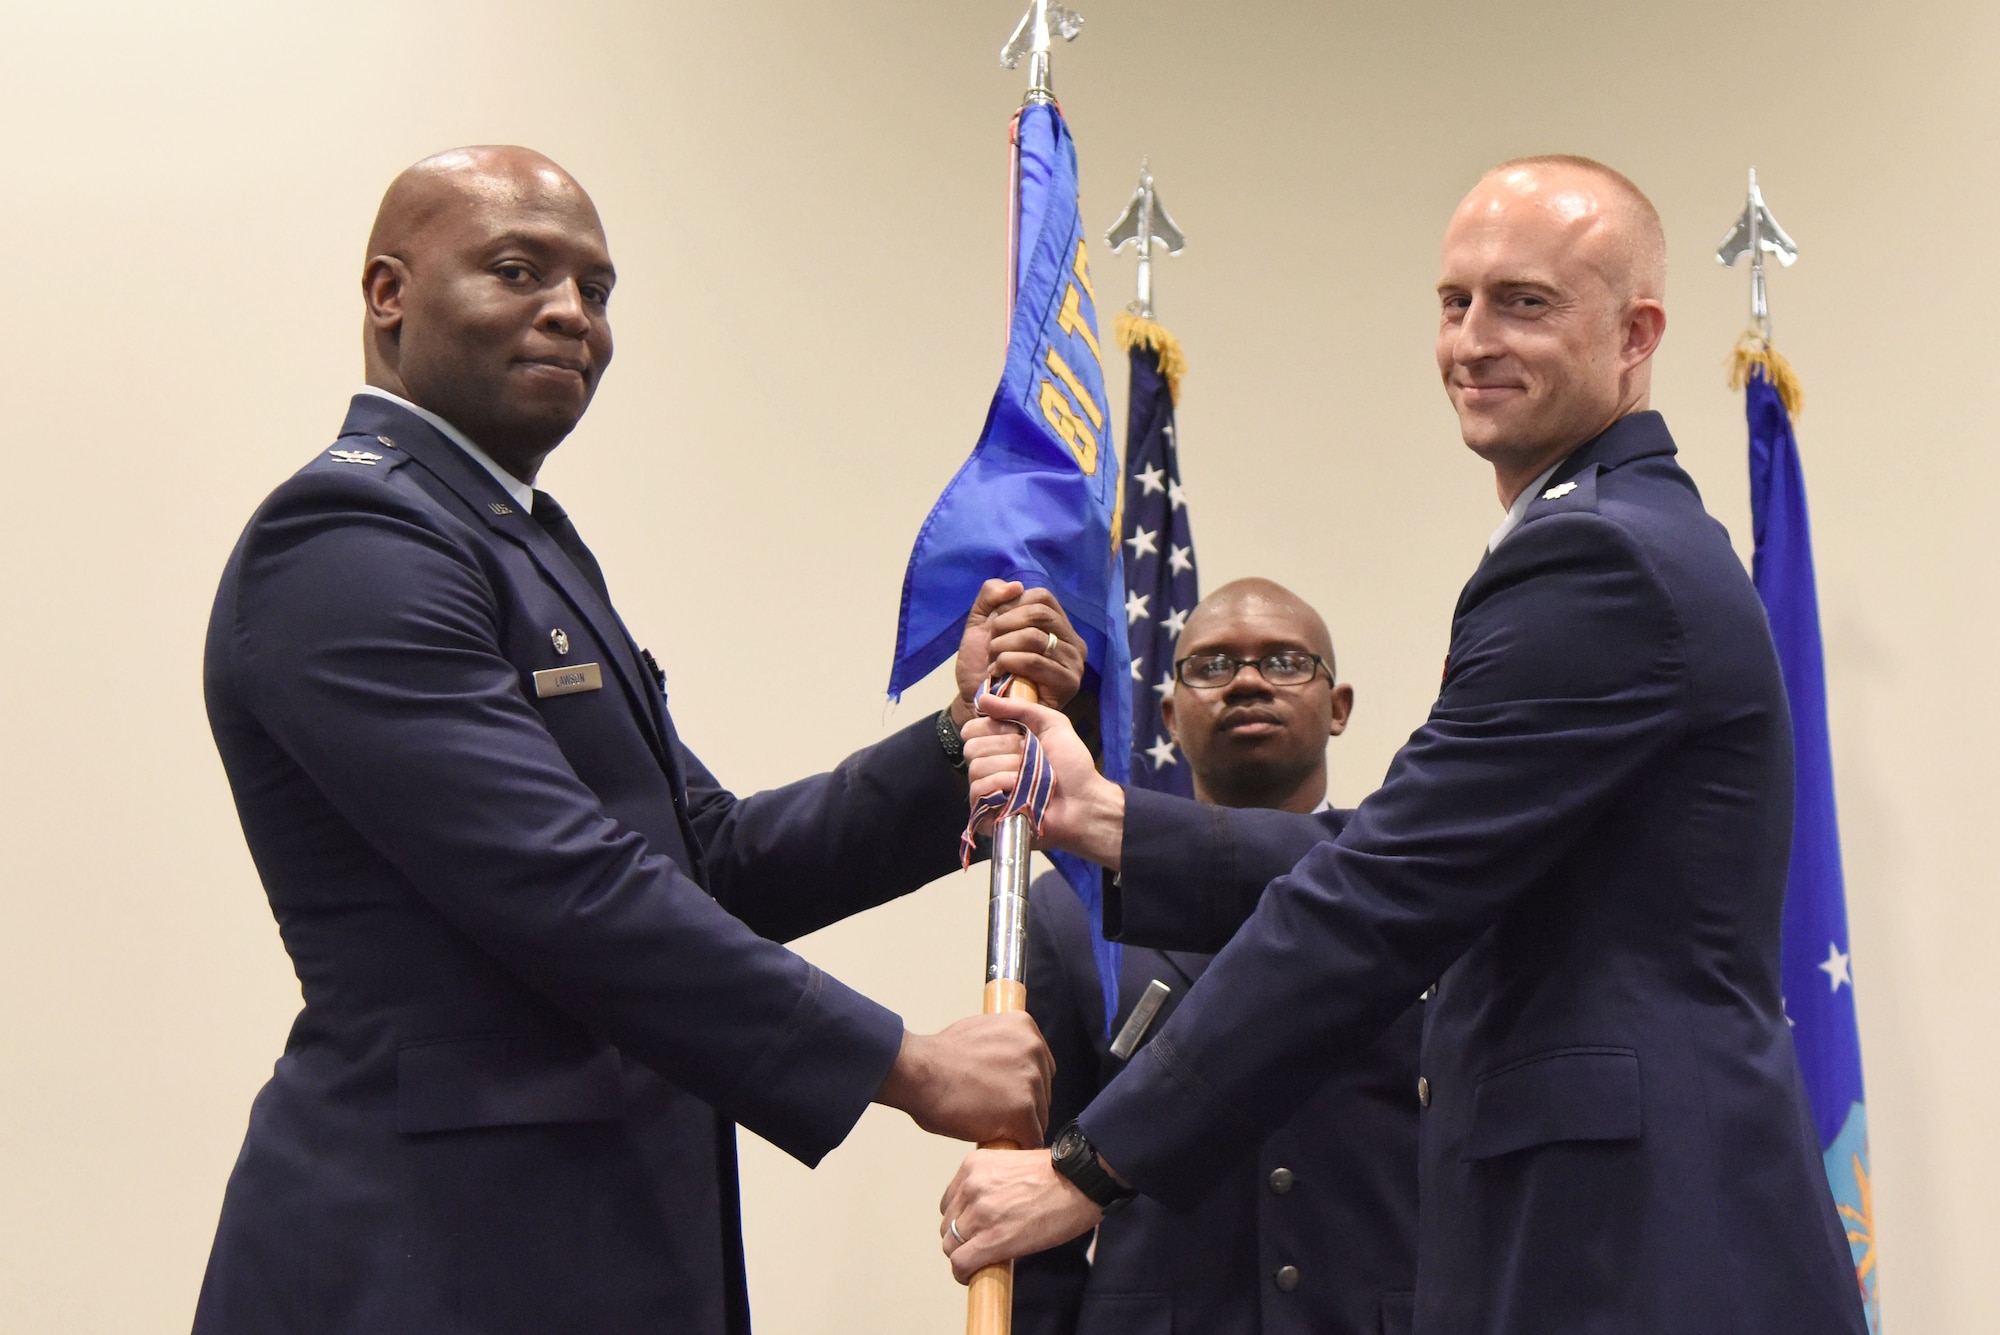 U.S. Air Force Col. Leo Lawson, Jr., 81st Training Group commander, passes the 333rd Training Squadron guidon to Lt. Col. Andrew Miller, 333rd TRS commander, during the 333rd TRS change of command ceremony in the Roberts Consolidated Aircraft Maintenance Facility at Keesler Air Force Base, Mississippi, July 24, 2018. The passing of the guidon is a ceremonial symbol of exchanging command from one commander to another. (U.S. Air Force photo by Kemberly Groue)